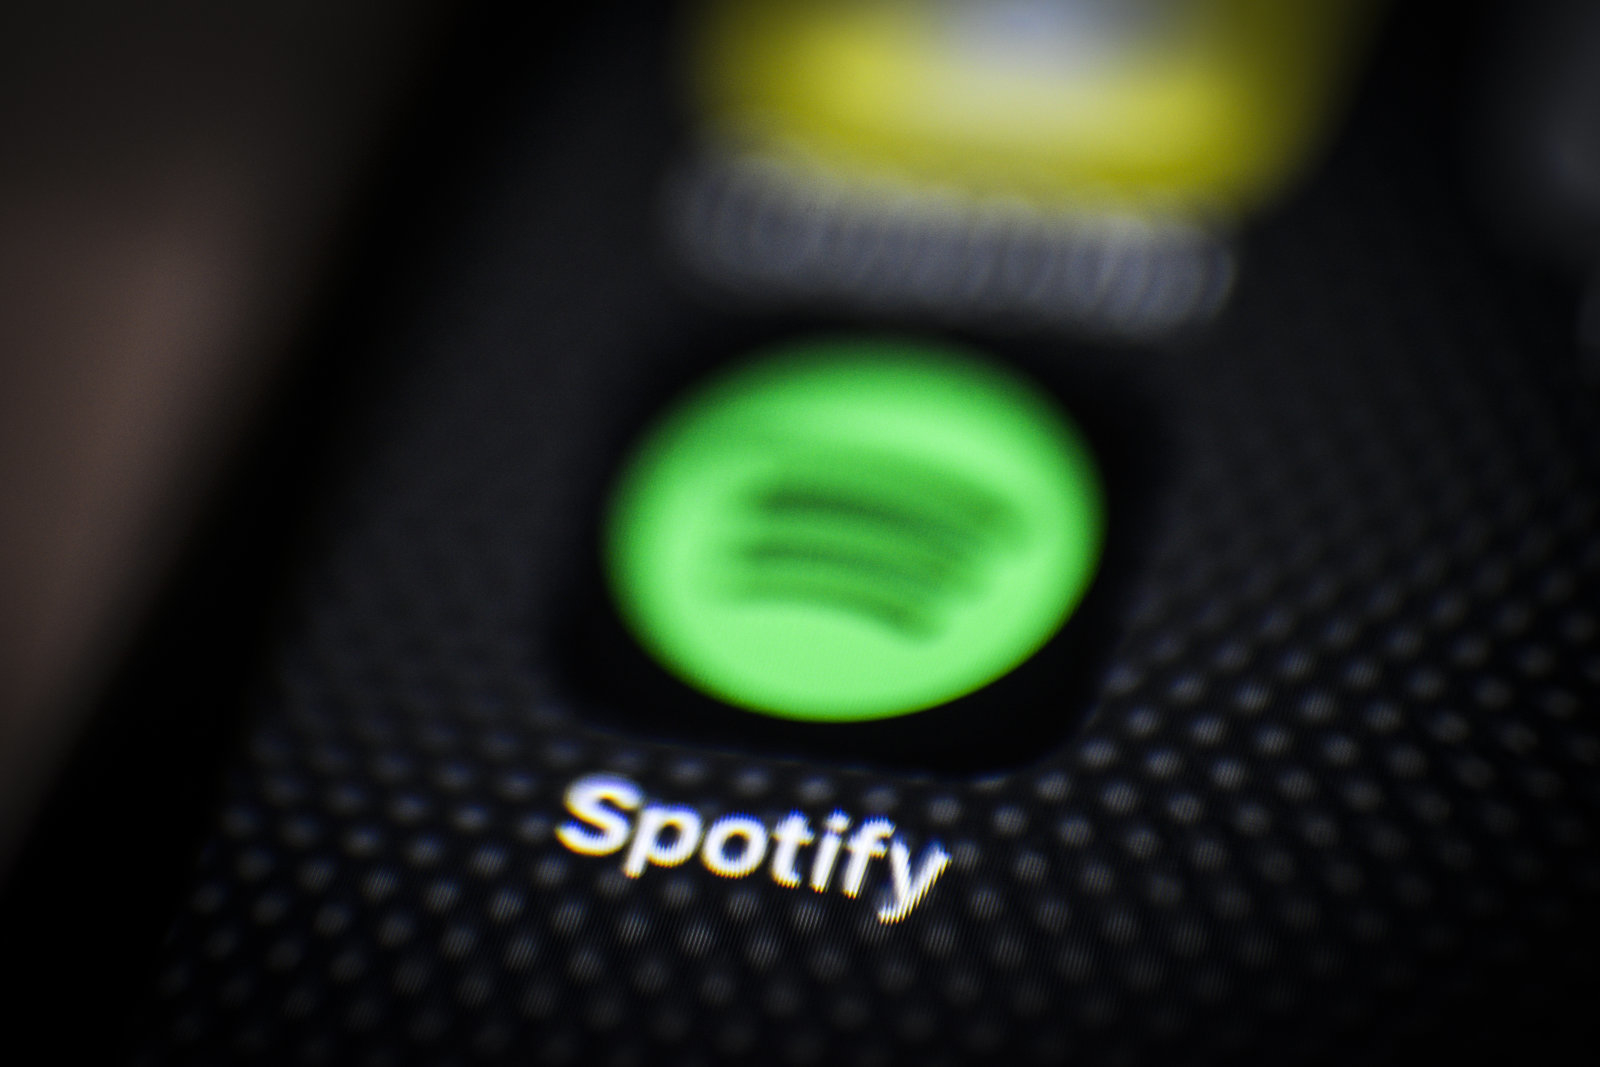 The Spotify applications is seen on an iPhone in this photo illustration on June 18, 2018. (Photo by Jaap Arriens/NurPhoto via Getty Images)